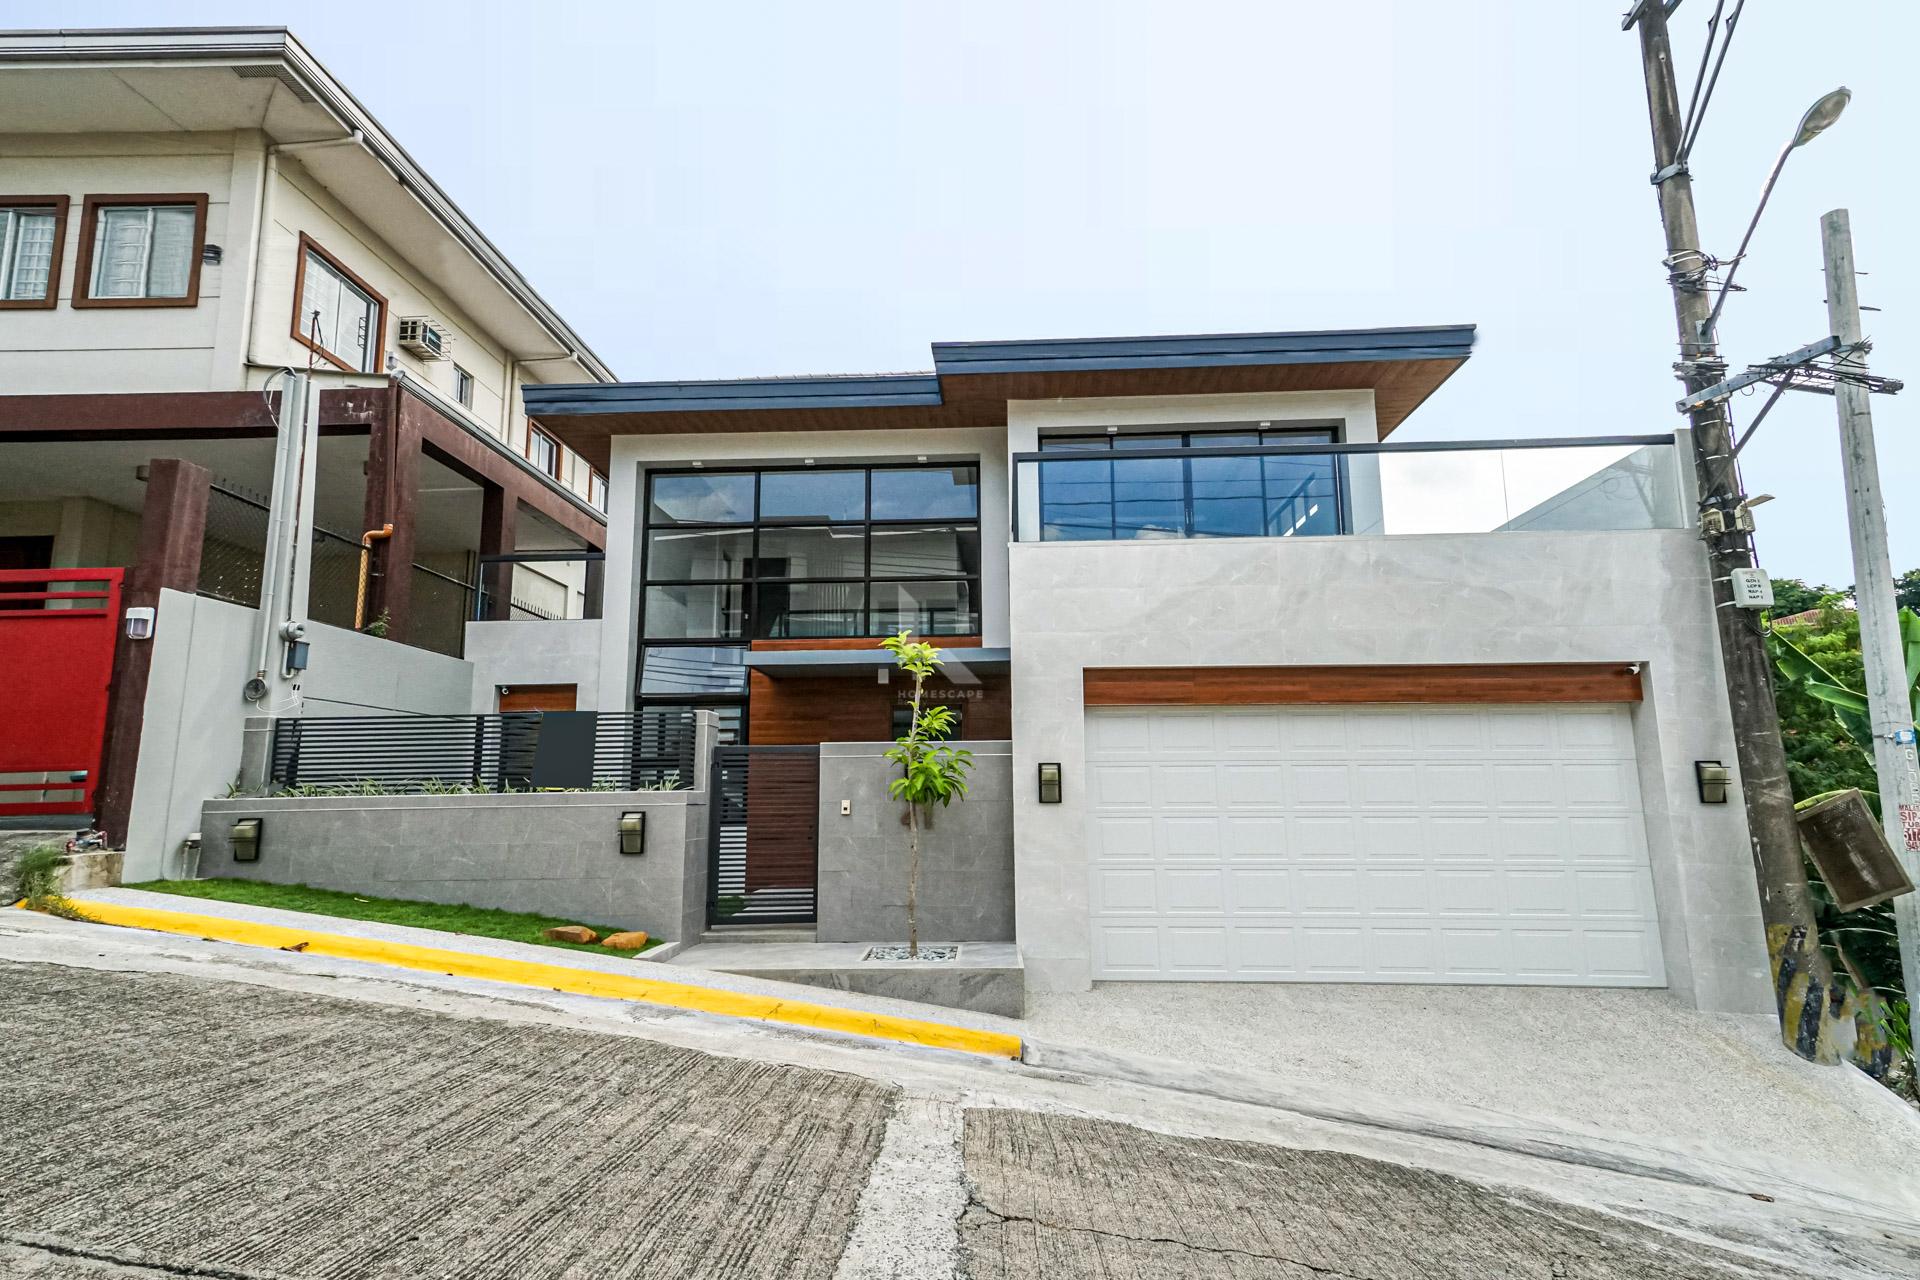 For Sale Brand-New House and Lot Located in Filinvest 2, Quezon City